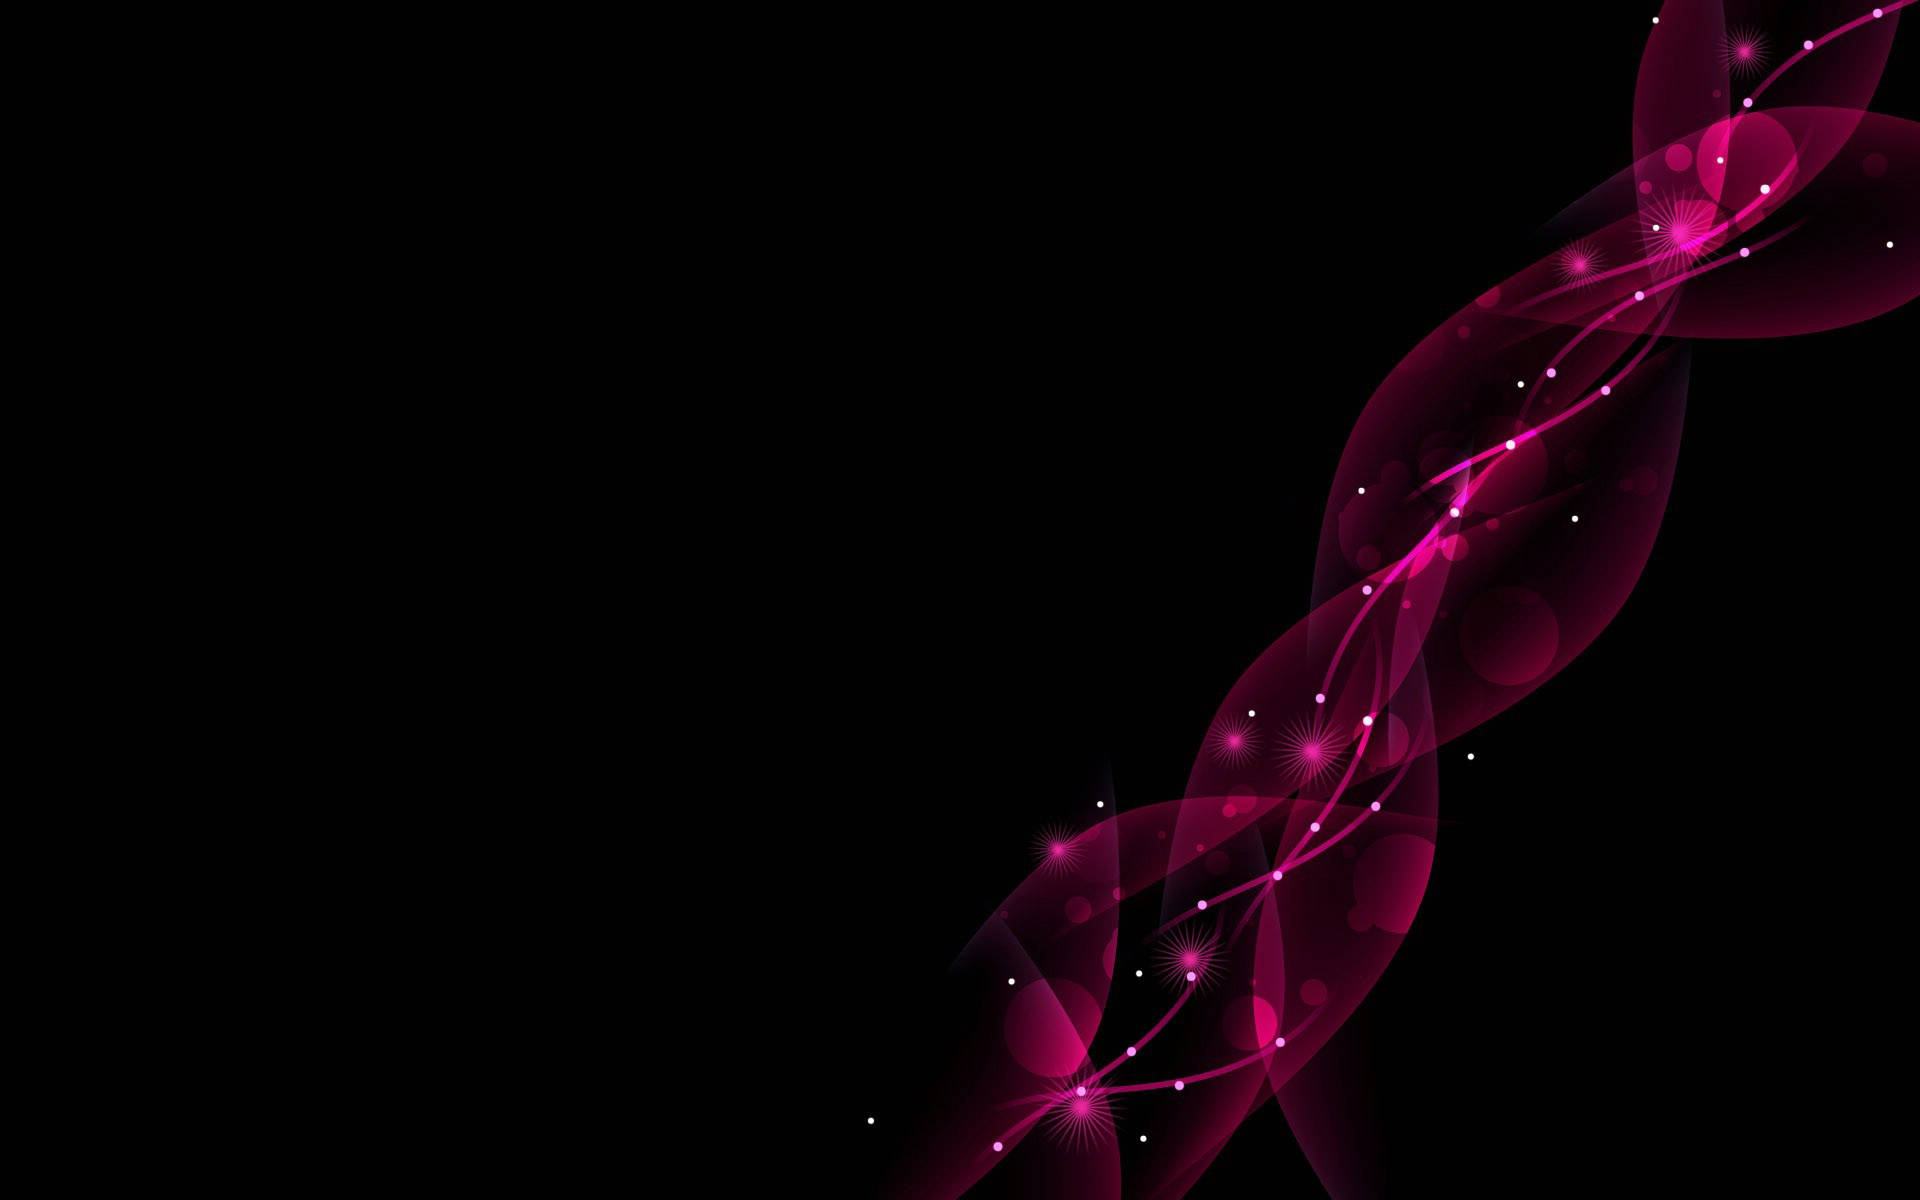 Black And Pink Aesthetic Wavy Fractal Wallpaper